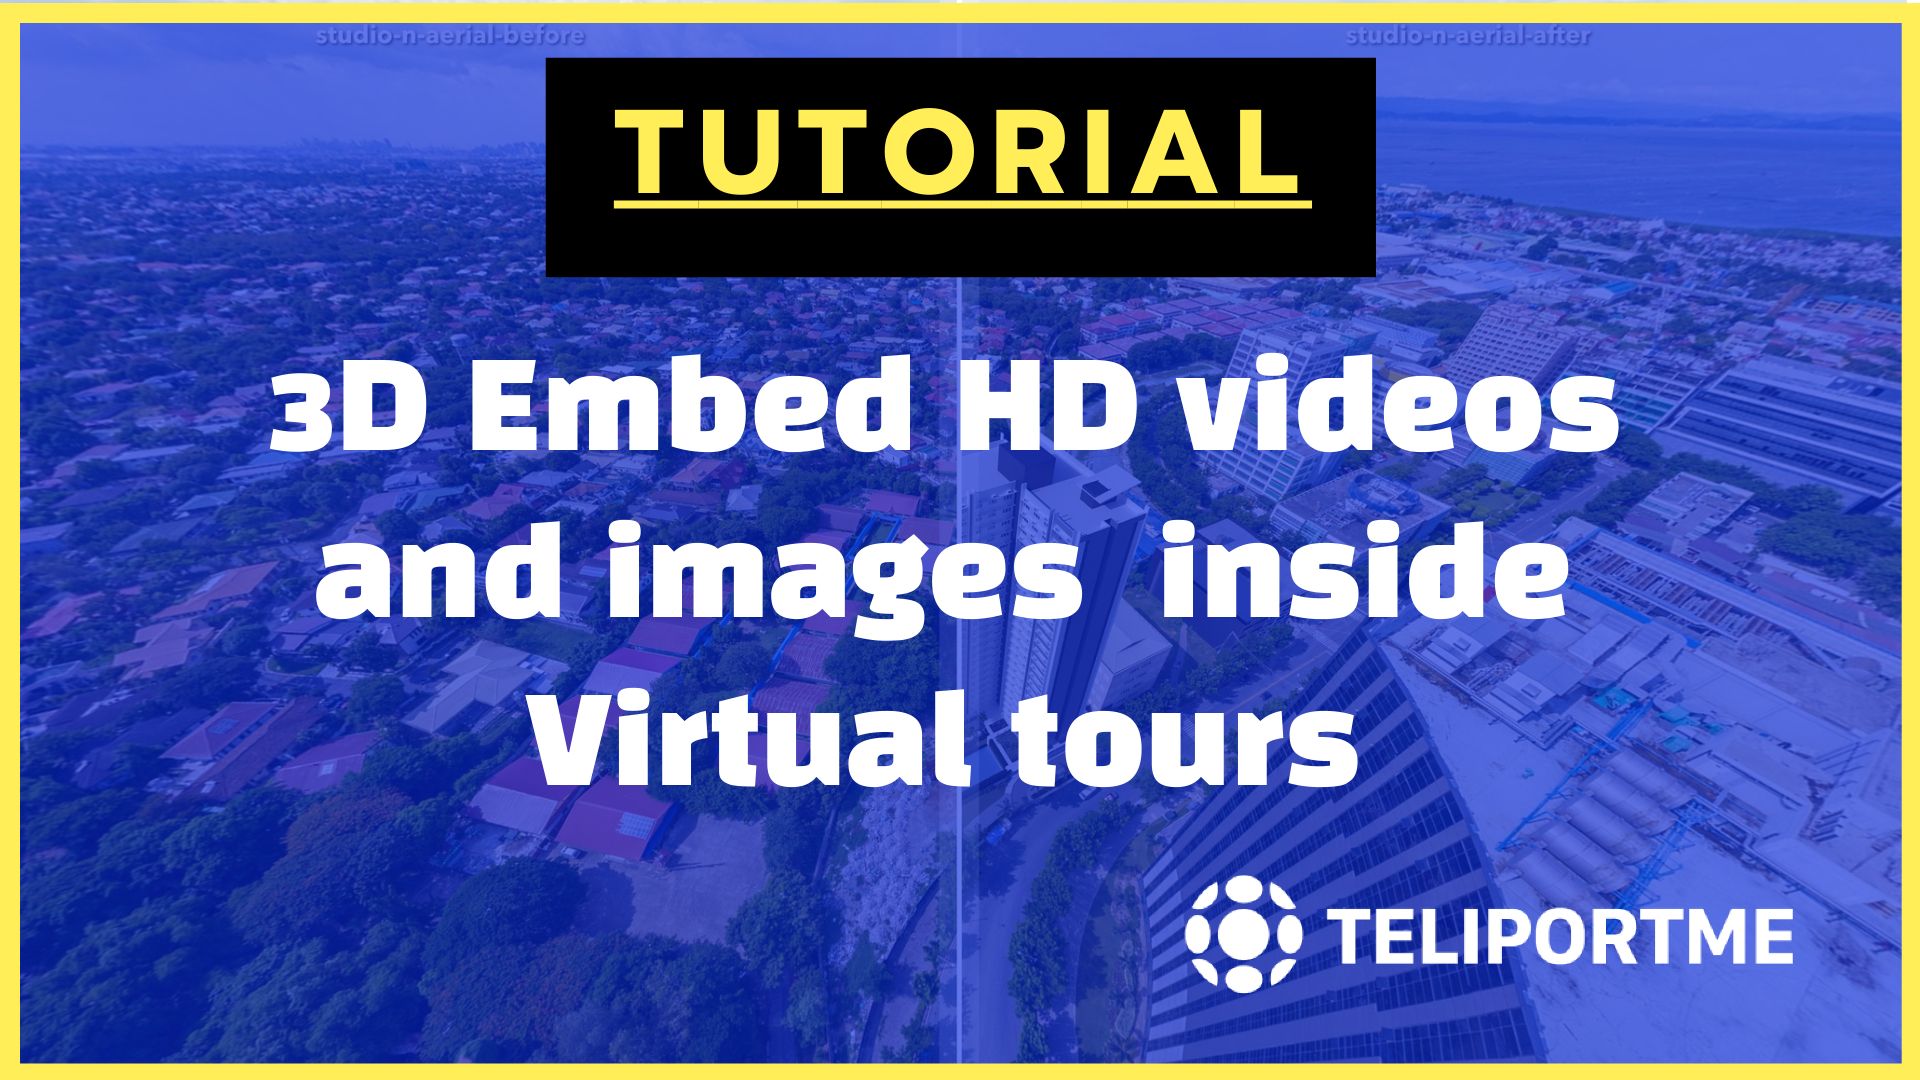 Magic Embed: Embedding videos in 3D inside your virtual tour.